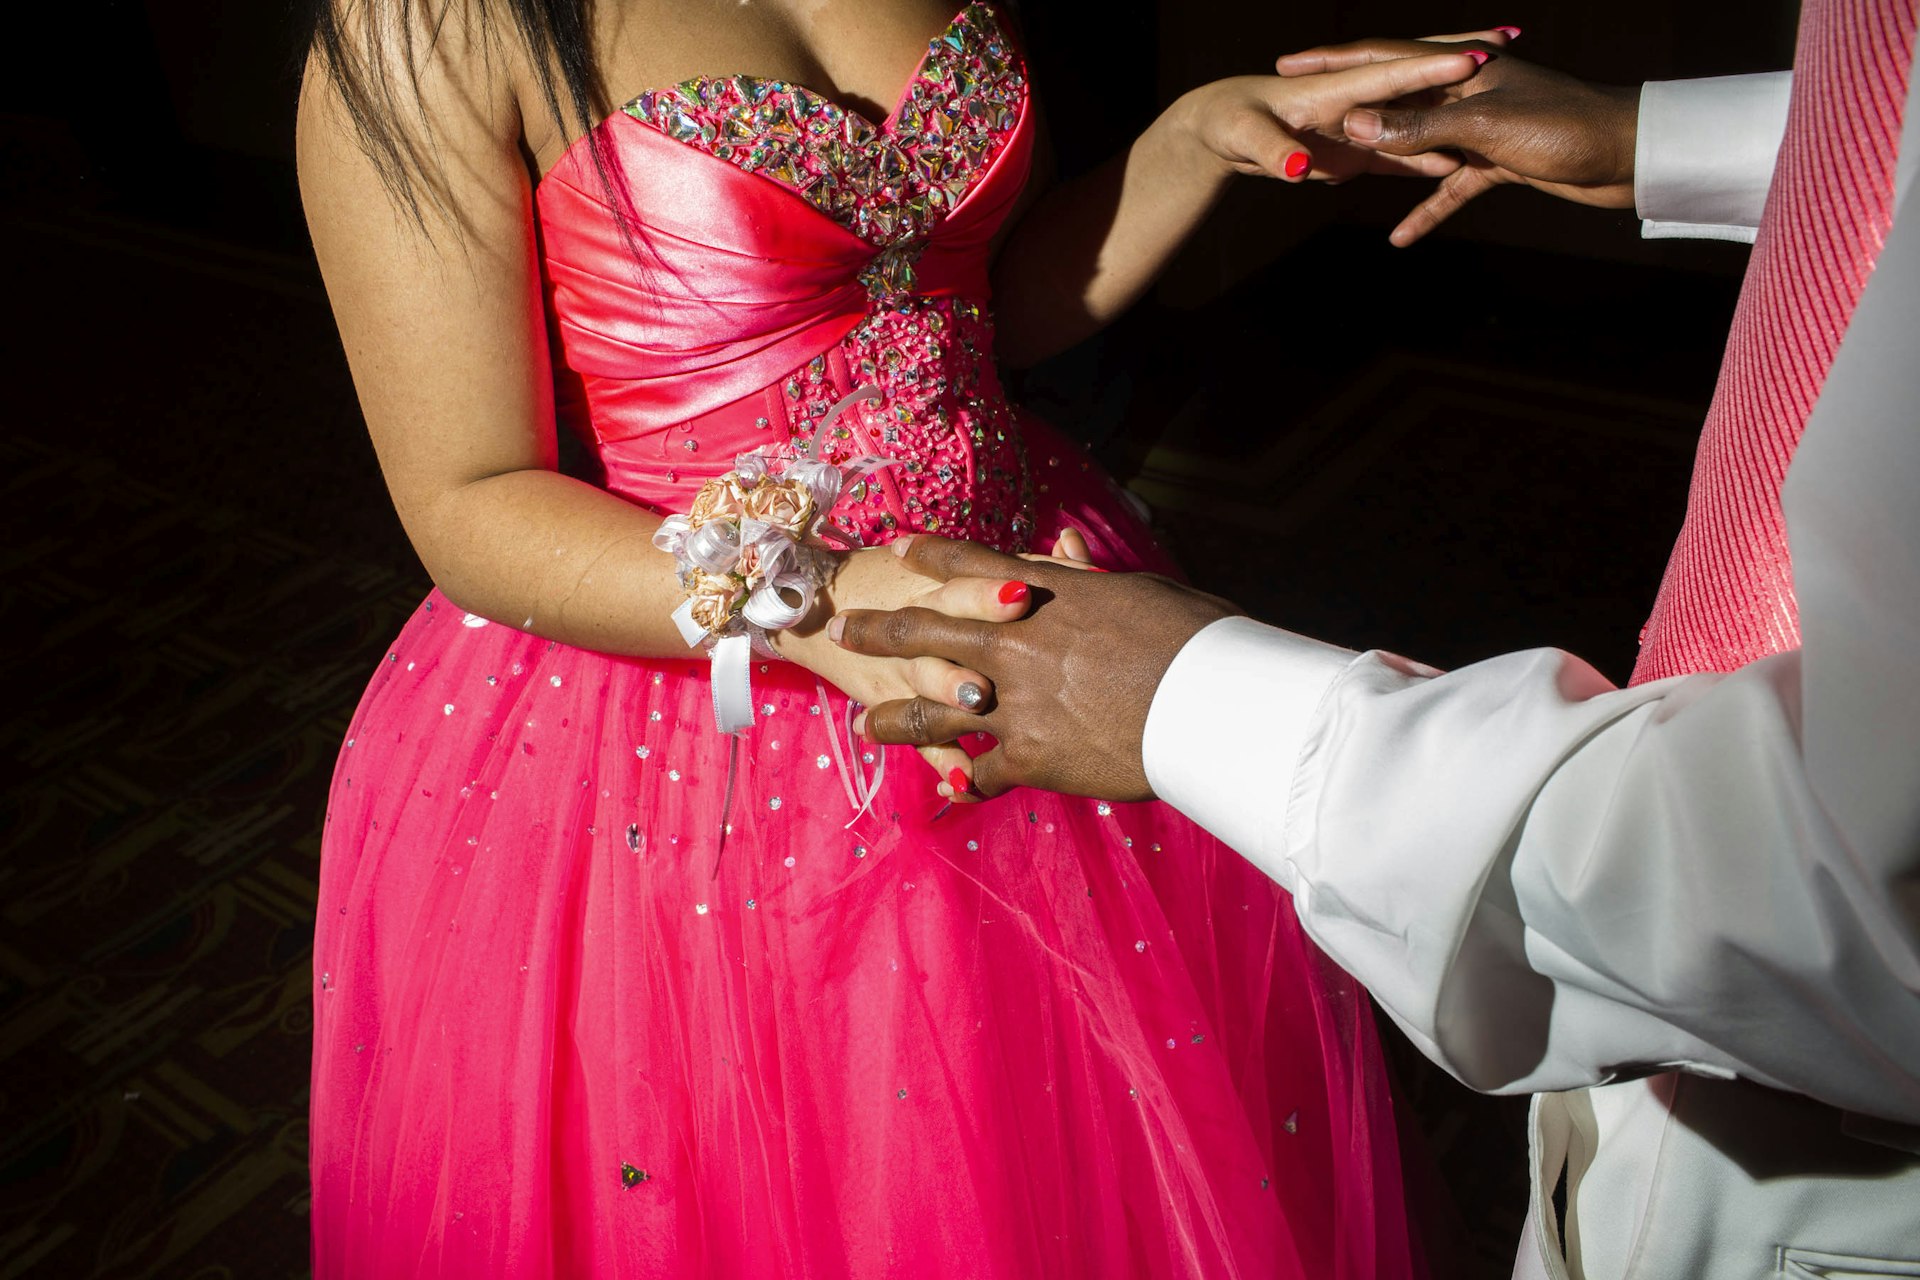 An unidentified couple holds hands while talking at their high school prom on Saturday, May 21, 2016 in Flint, Michigan.